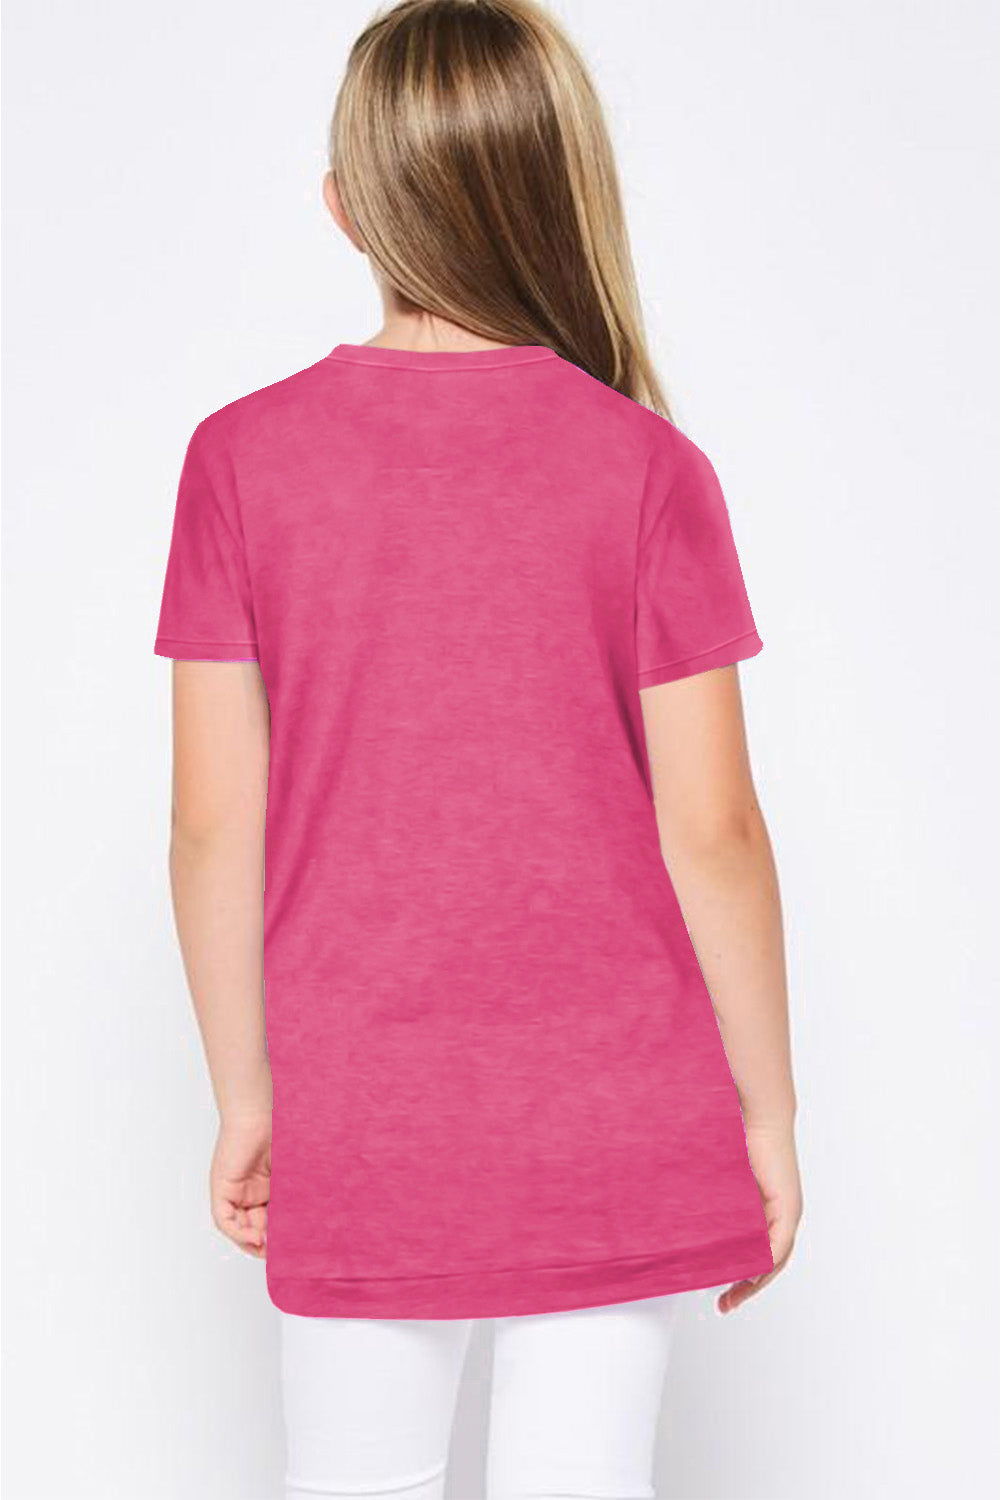 Rosy Buttoned Arched Hem Girls T-shirt